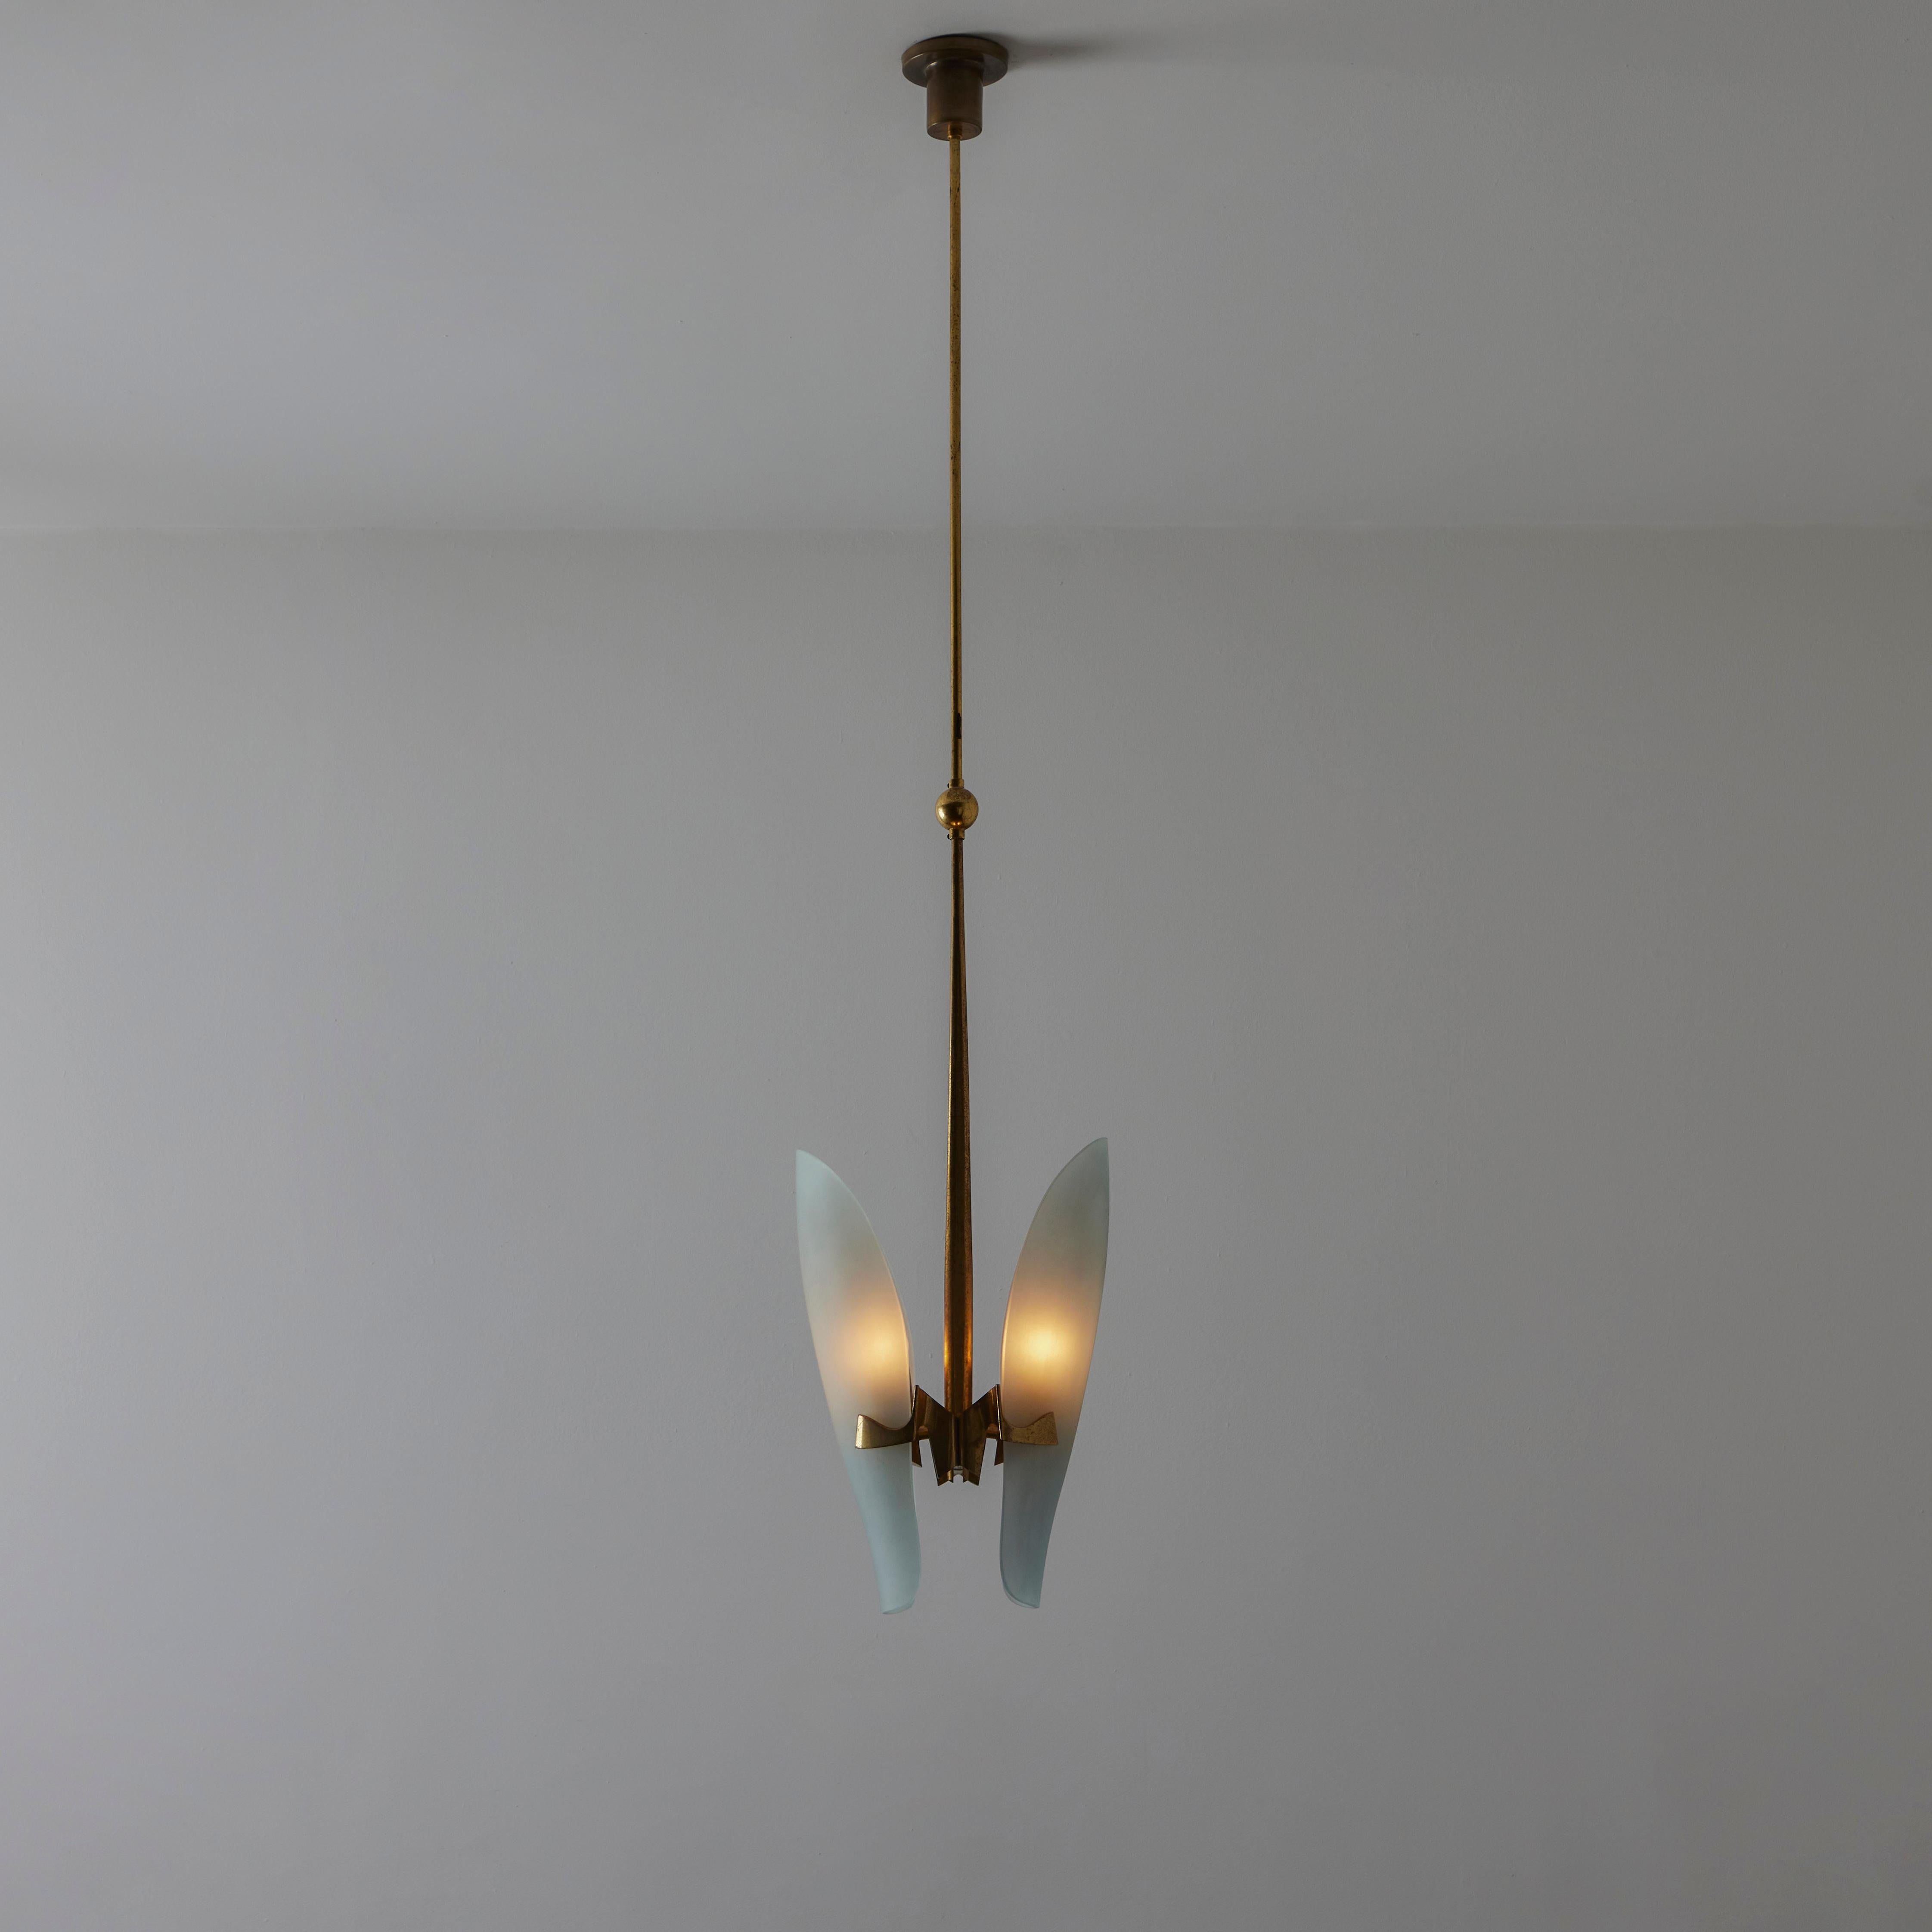 Model 1636 Pendant by Max Ingrand for Fontana Arte. Designed and manufactured in Italy, circa the 1950s. A gorgeous polished brass drop pendant featuring a rather complex design at the bottom where two etched pieces of identical glass are hoisted on